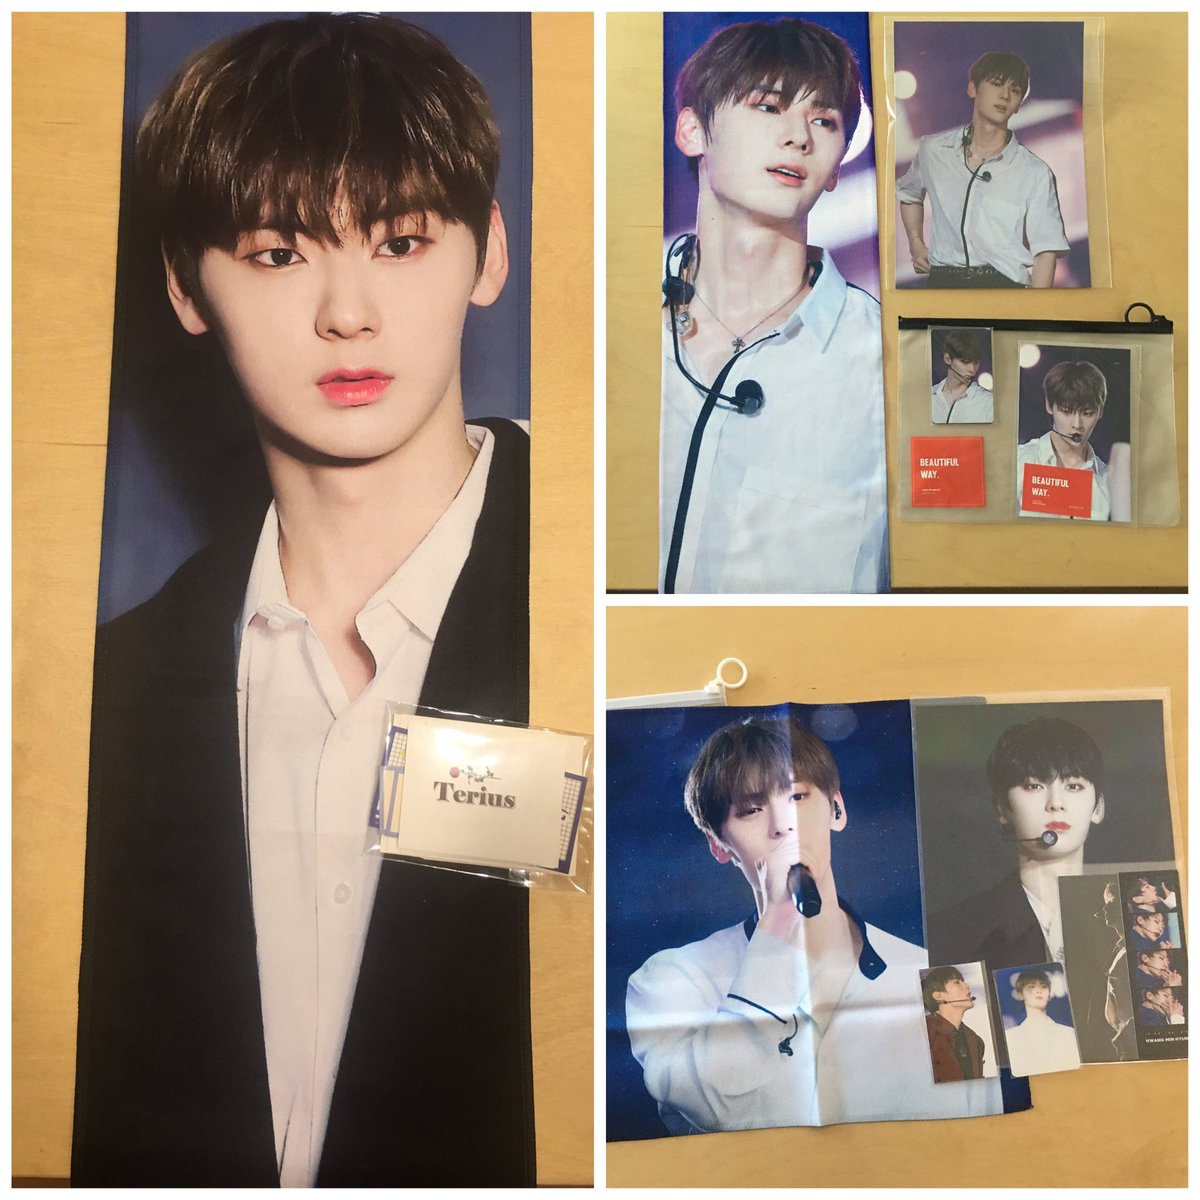 Anneyeong Porkies!HWANG MINHYUN CHEERING SLOGAN PHP 950 each (w/zipper bags)1 DAY PAYMENT OF 50% OR FULL. OTHER 50% TIL DOP.DOP AUG 19SHIP TO PH AUG 22ETA 15 DAYS OR DEPENDS ON THE SITN.MOP BPI & GCASH ONLY!DM TO ORDER.Kamsa!  #porKShopGO19  #wannaone